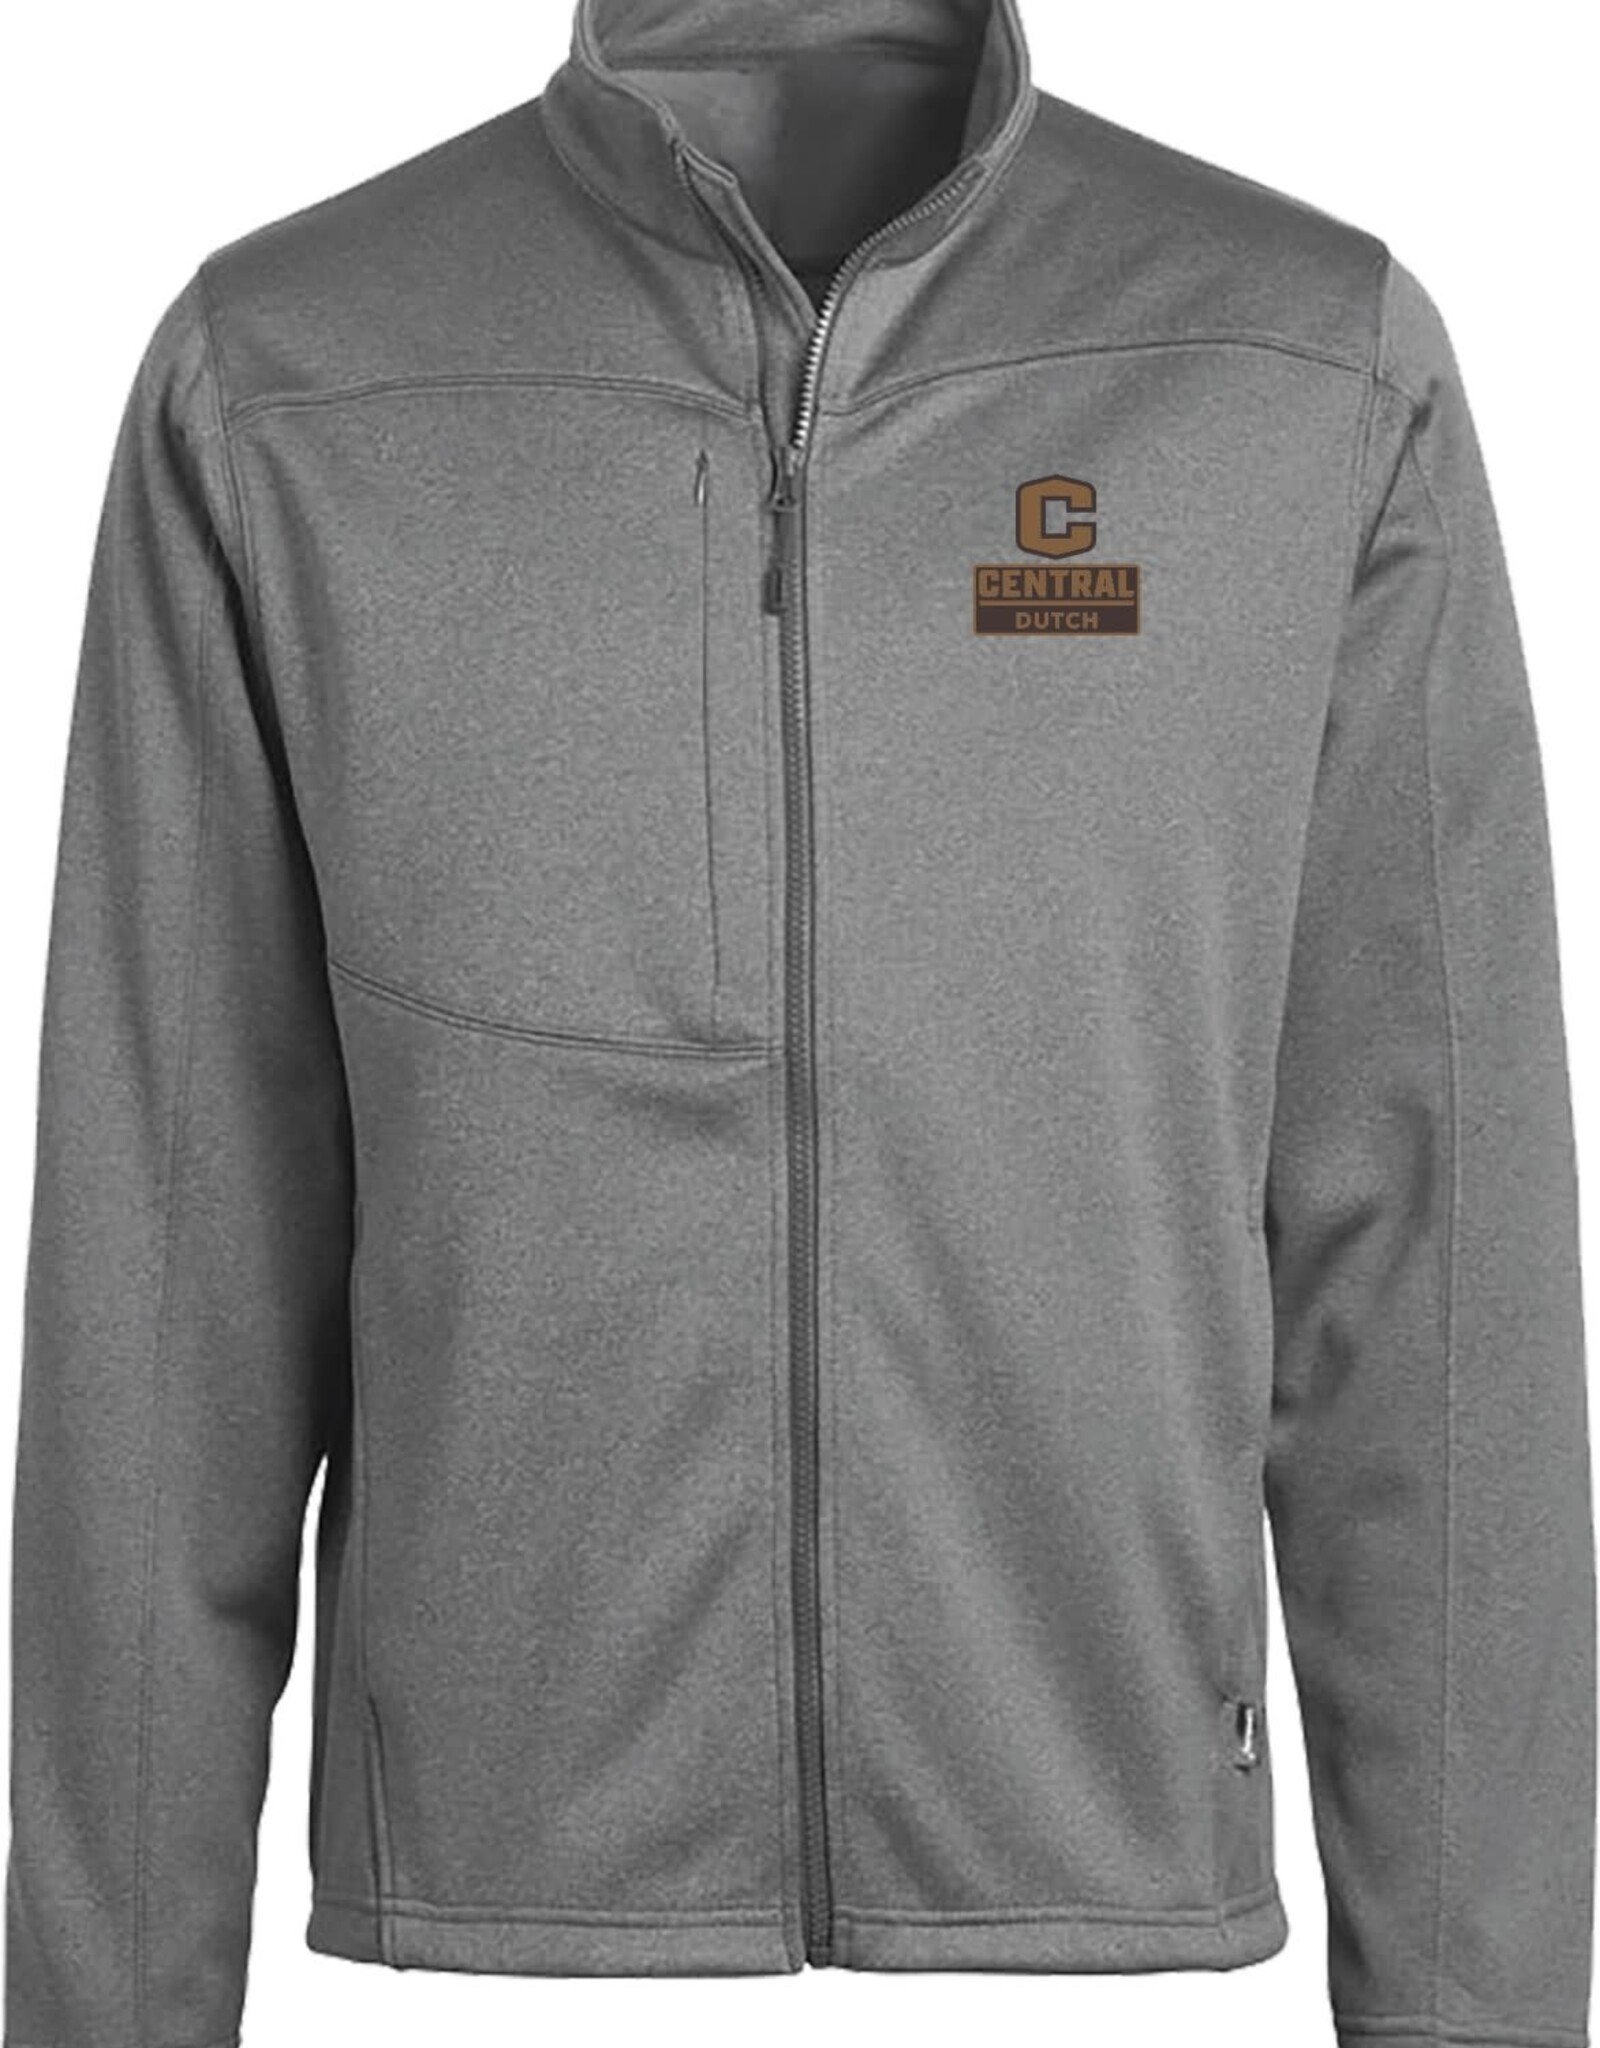 College House College House Soft Shell FZ with Leather Patch Charcoal